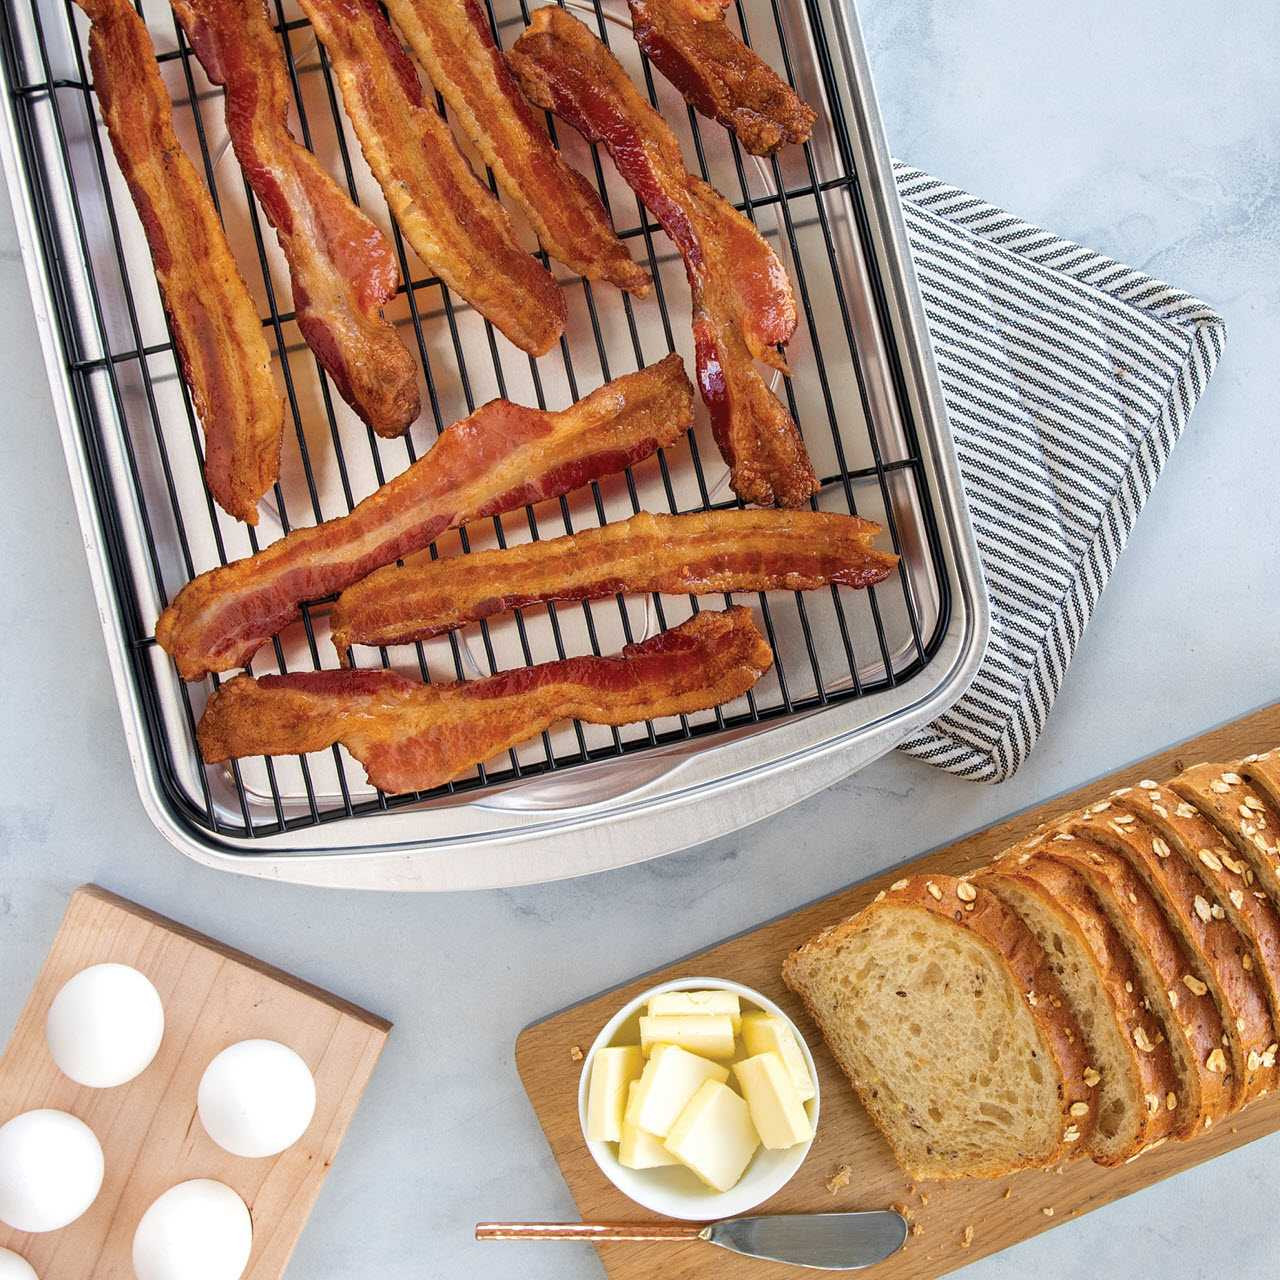 https://cdn11.bigcommerce.com/s-21kj3ntgv1/images/stencil/1280x1280/products/535/2088/Nordic-Ware-Oven-Crisp-Baking-Tray-with_Bacon__00862.1633992360.jpg?c=2